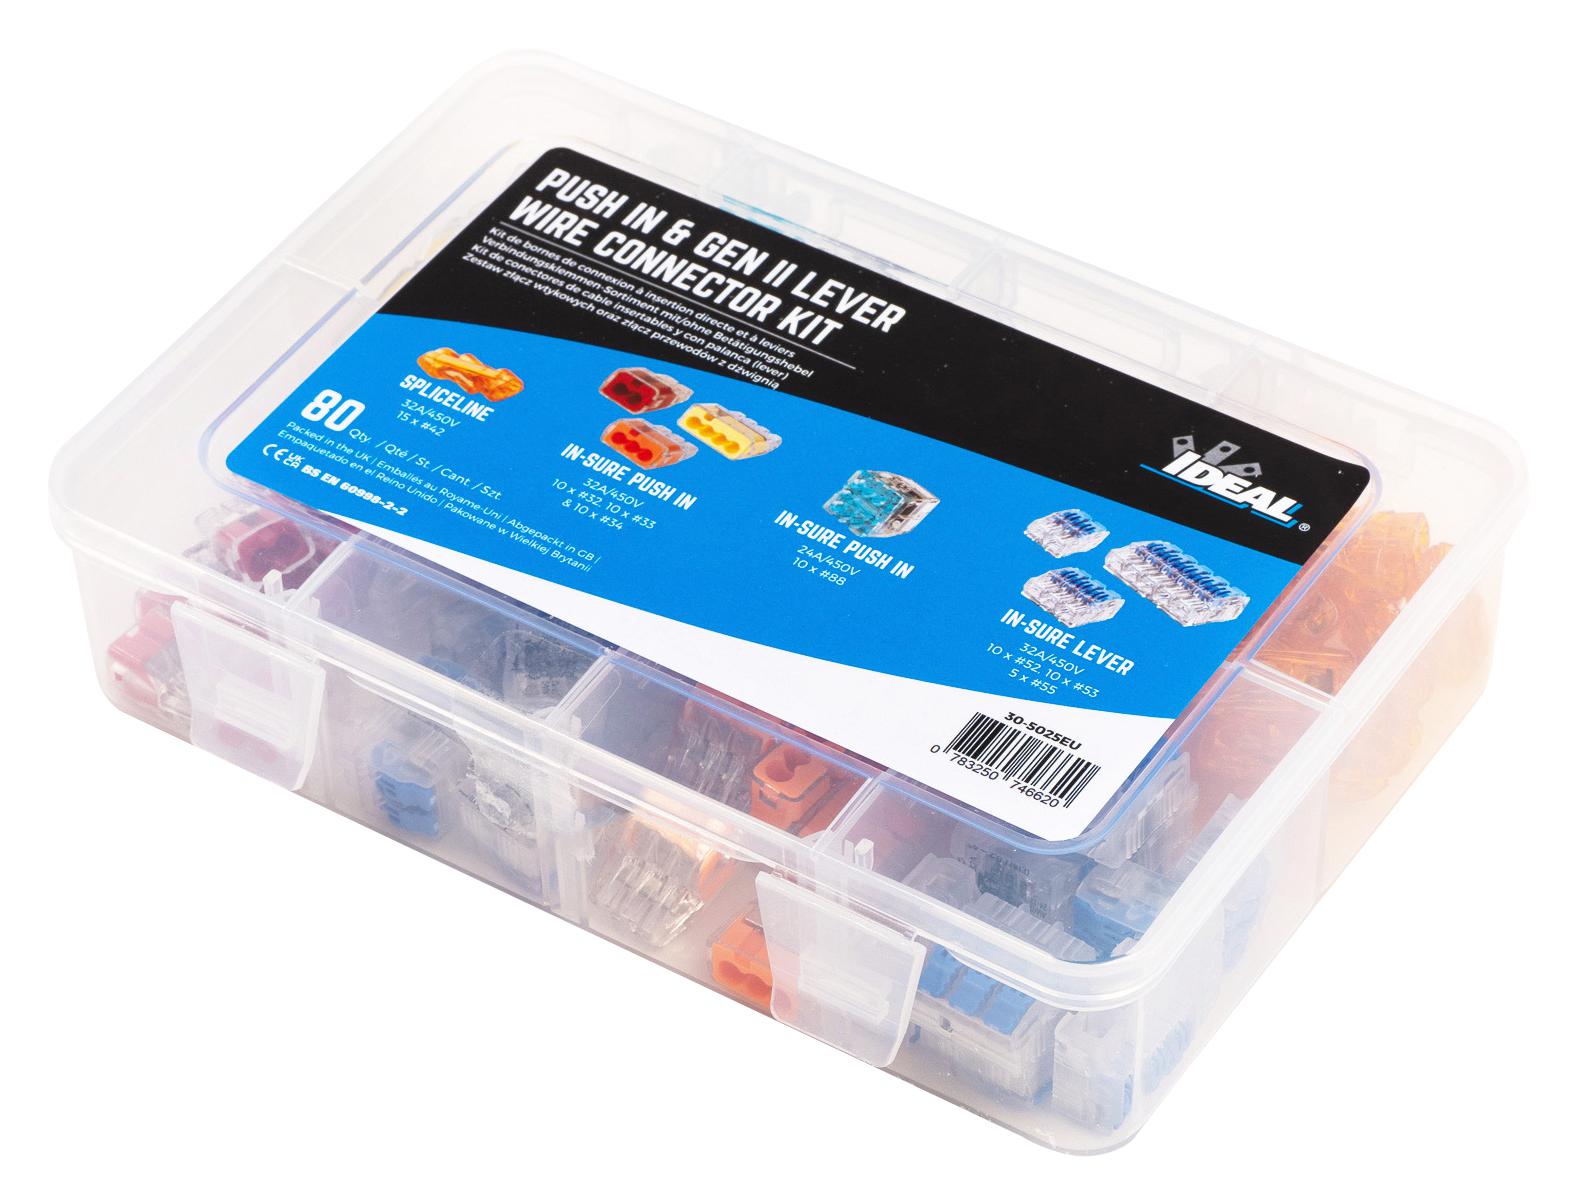 Ideal 30-5025Eu Connector Kit, Wire Connector, 80Pc